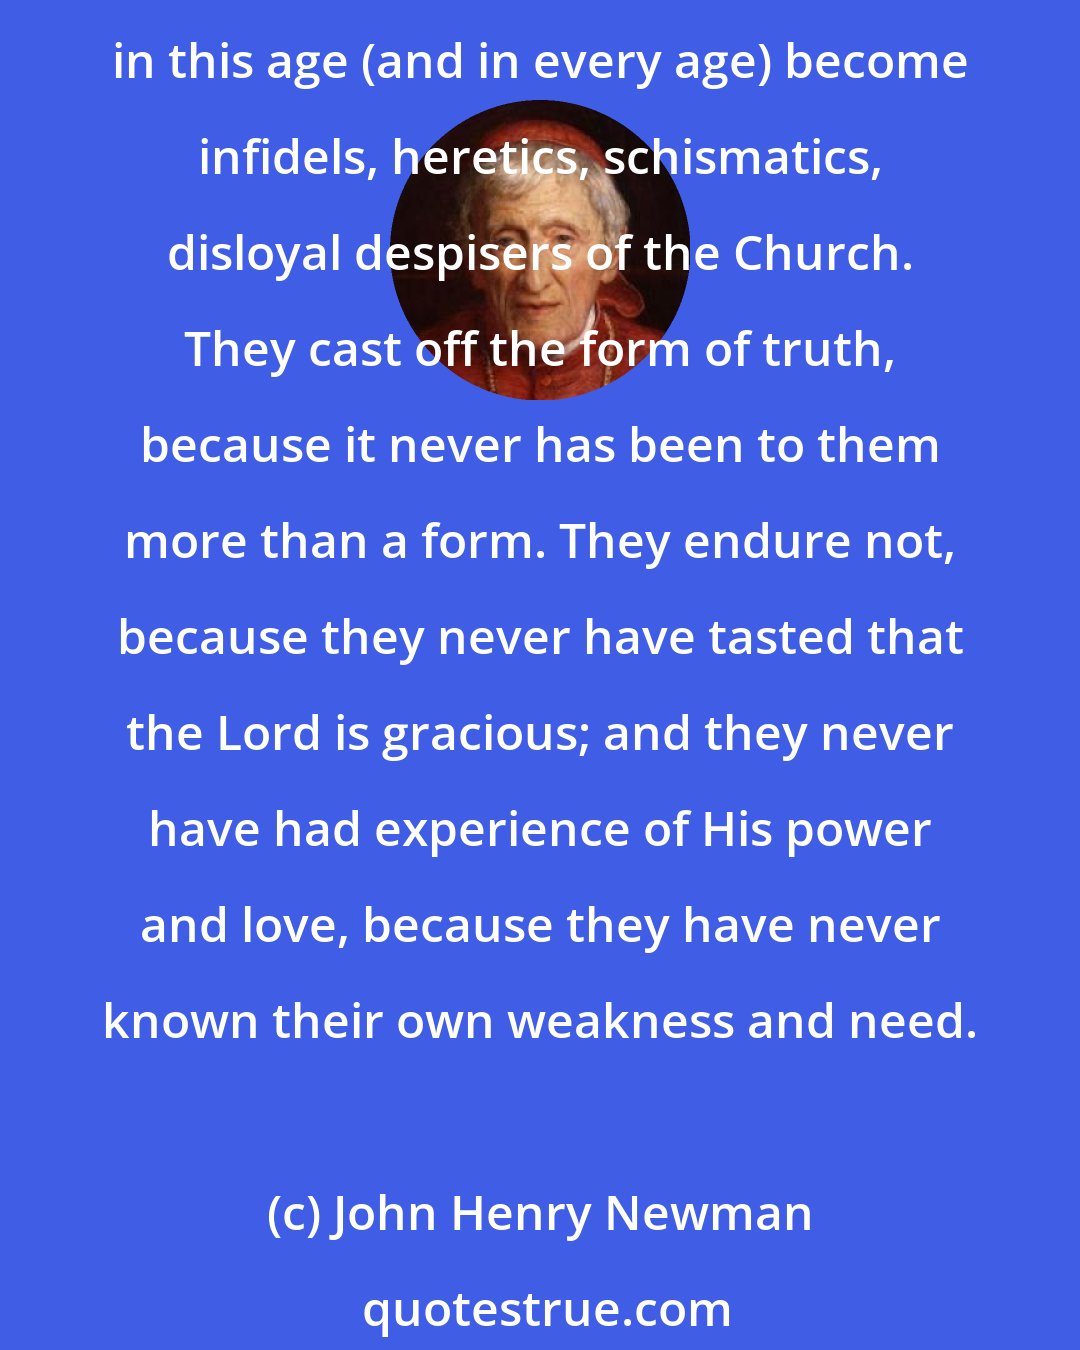 John Henry Newman: Without self-knowledge you have no root in yourselves personally; you may endure for a time, but under affliction or persecution your faith will not last. This is why many in this age (and in every age) become infidels, heretics, schismatics, disloyal despisers of the Church. They cast off the form of truth, because it never has been to them more than a form. They endure not, because they never have tasted that the Lord is gracious; and they never have had experience of His power and love, because they have never known their own weakness and need.